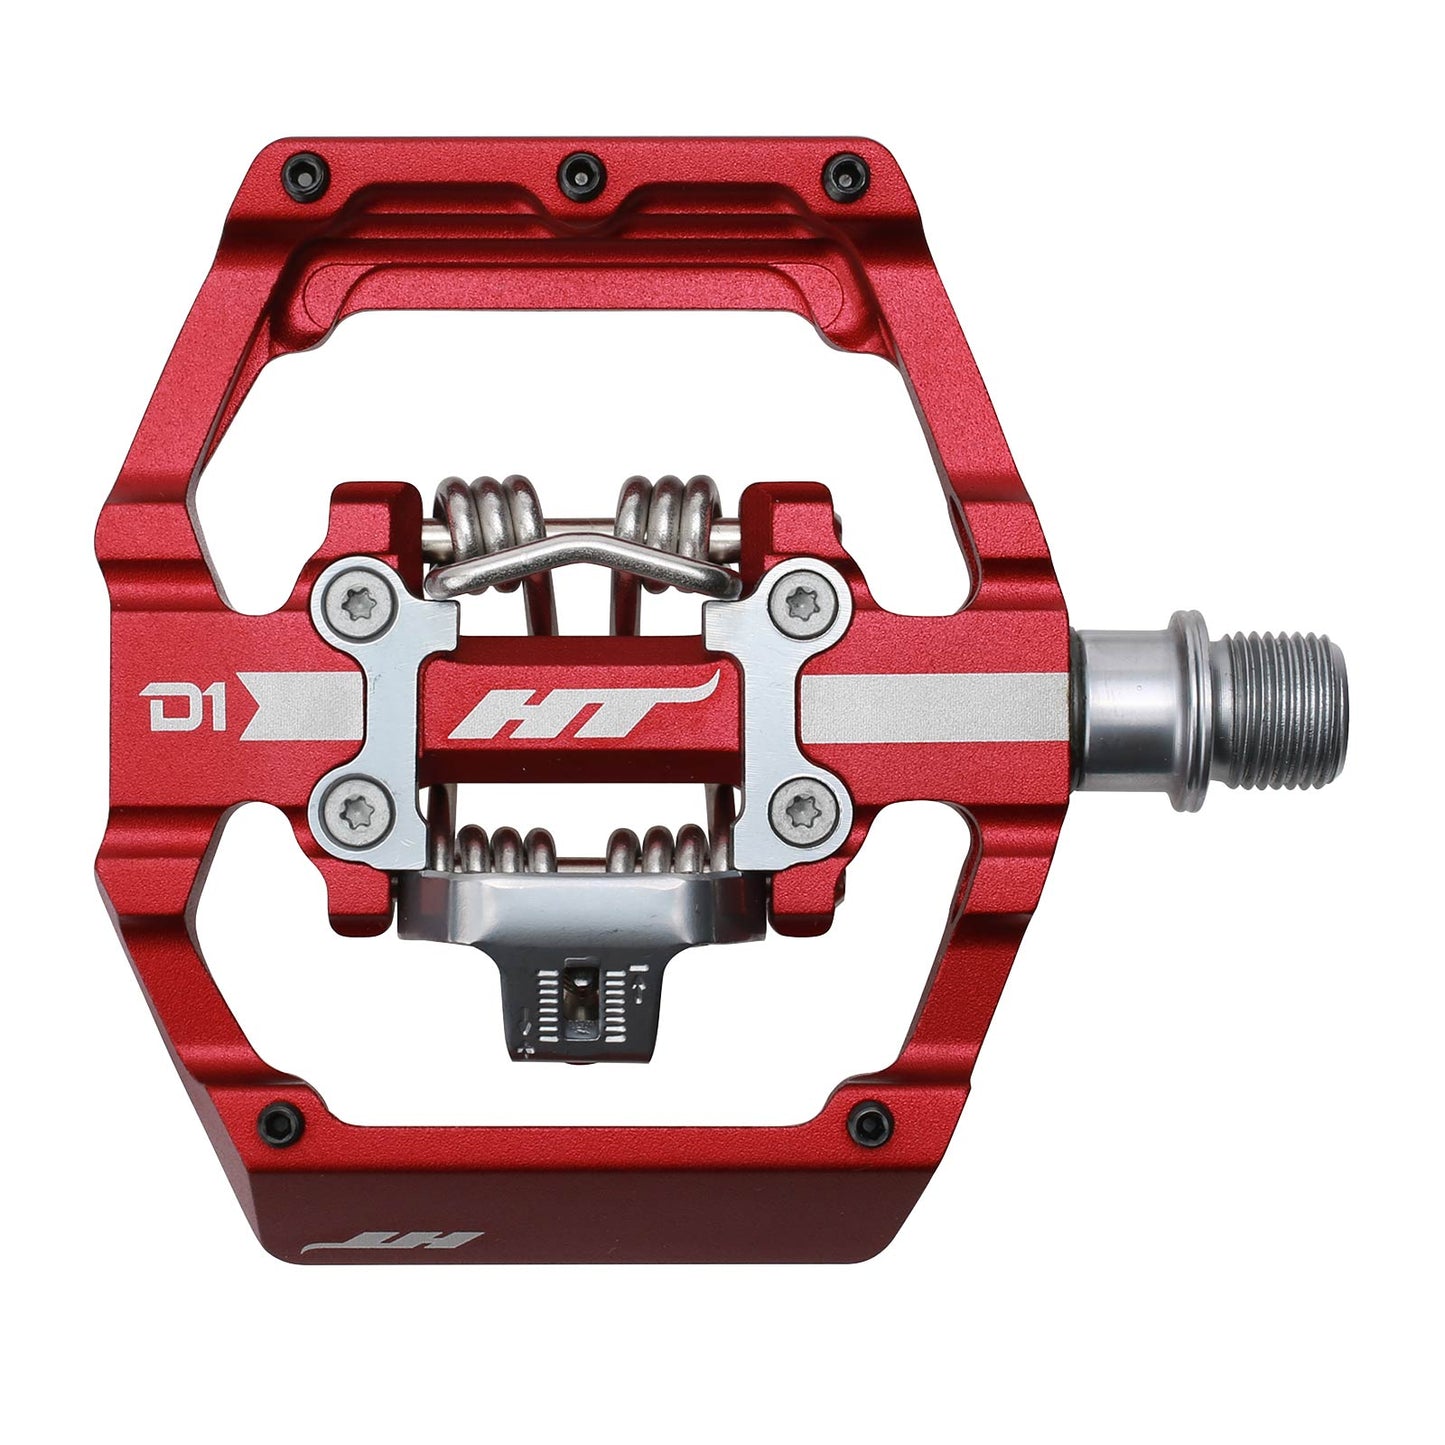 Ht D1 Pedals Alloy / CNC CRMO - Red